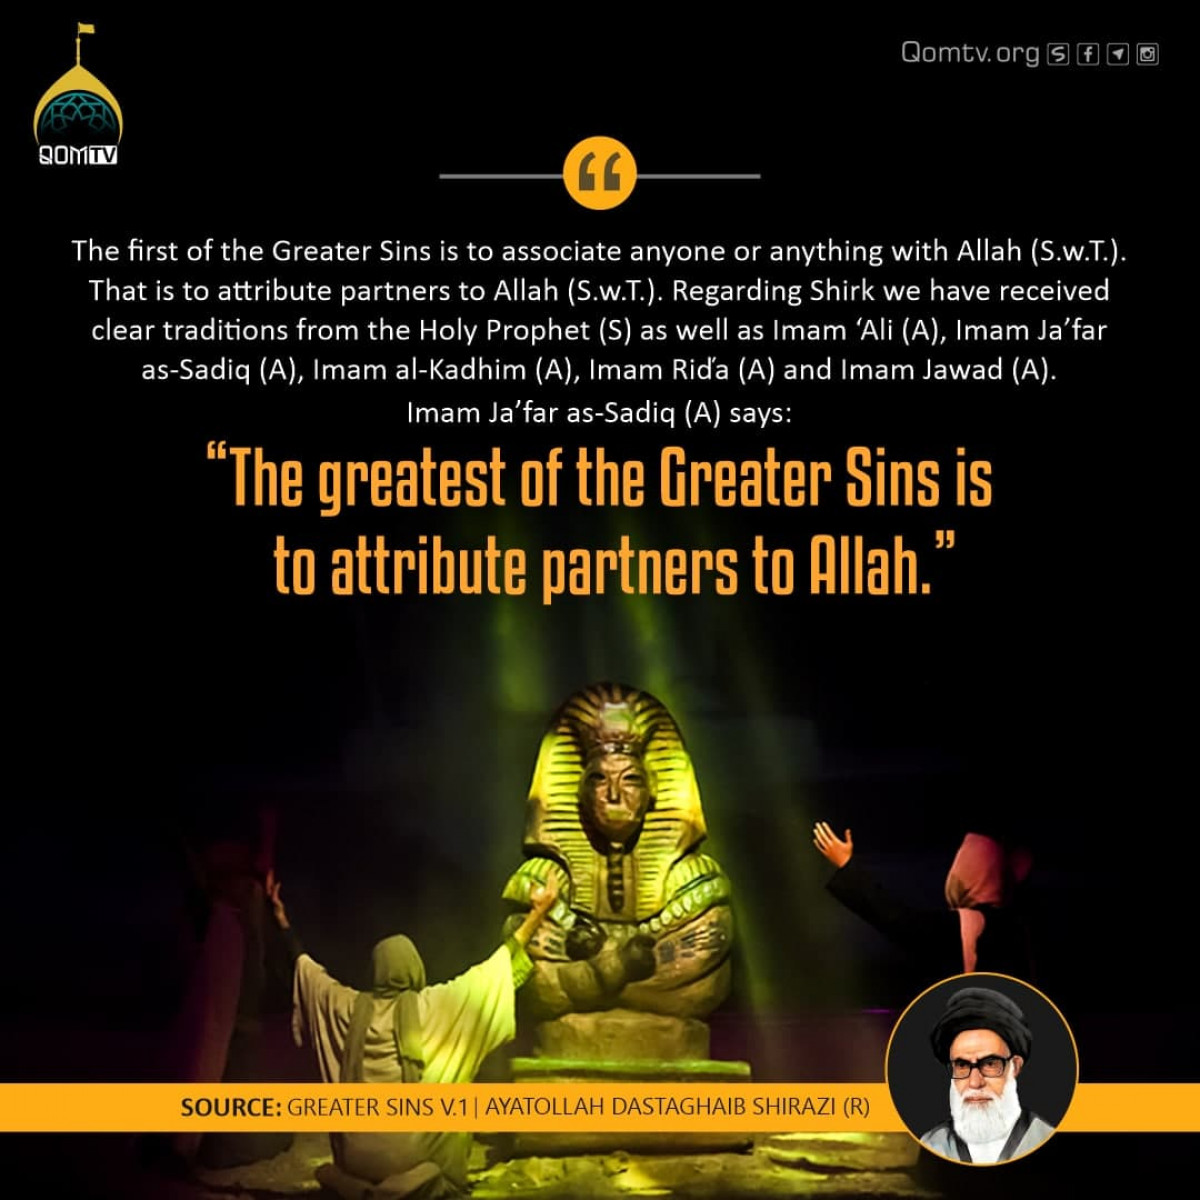 The first of the Greater Sins is to associate anyone or anything with Allah (S.w.T.). That is to attribute partners to Allah (S.w.T.)